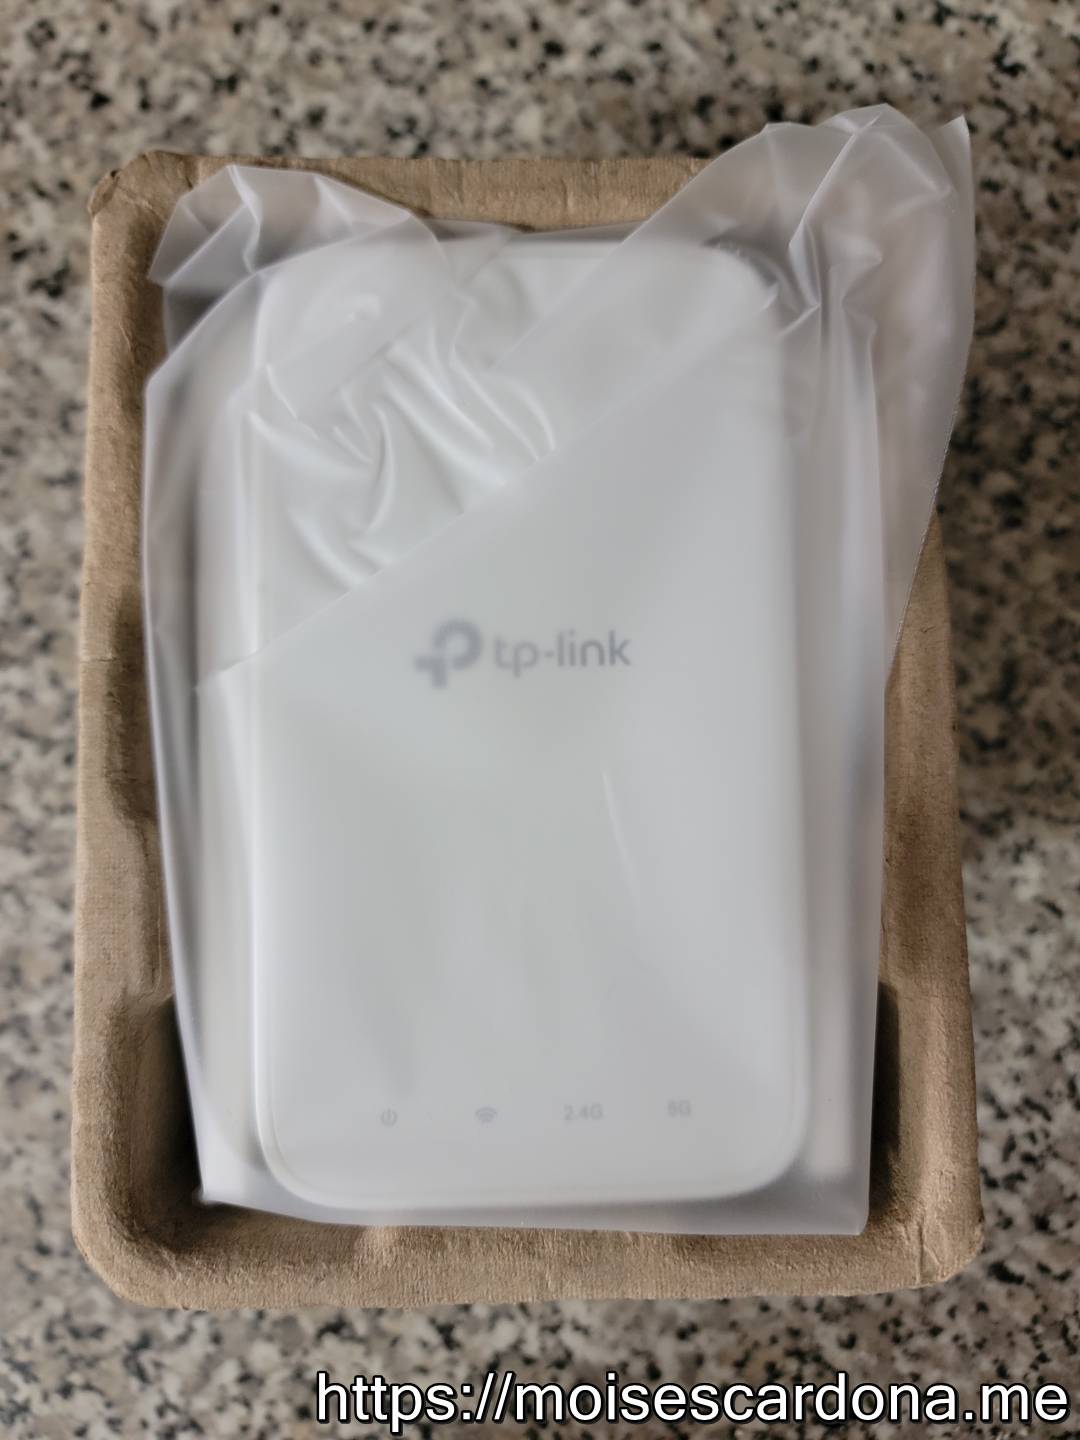 TP-Link AC750 Wifi Extender (RE215) - Box Opened 2